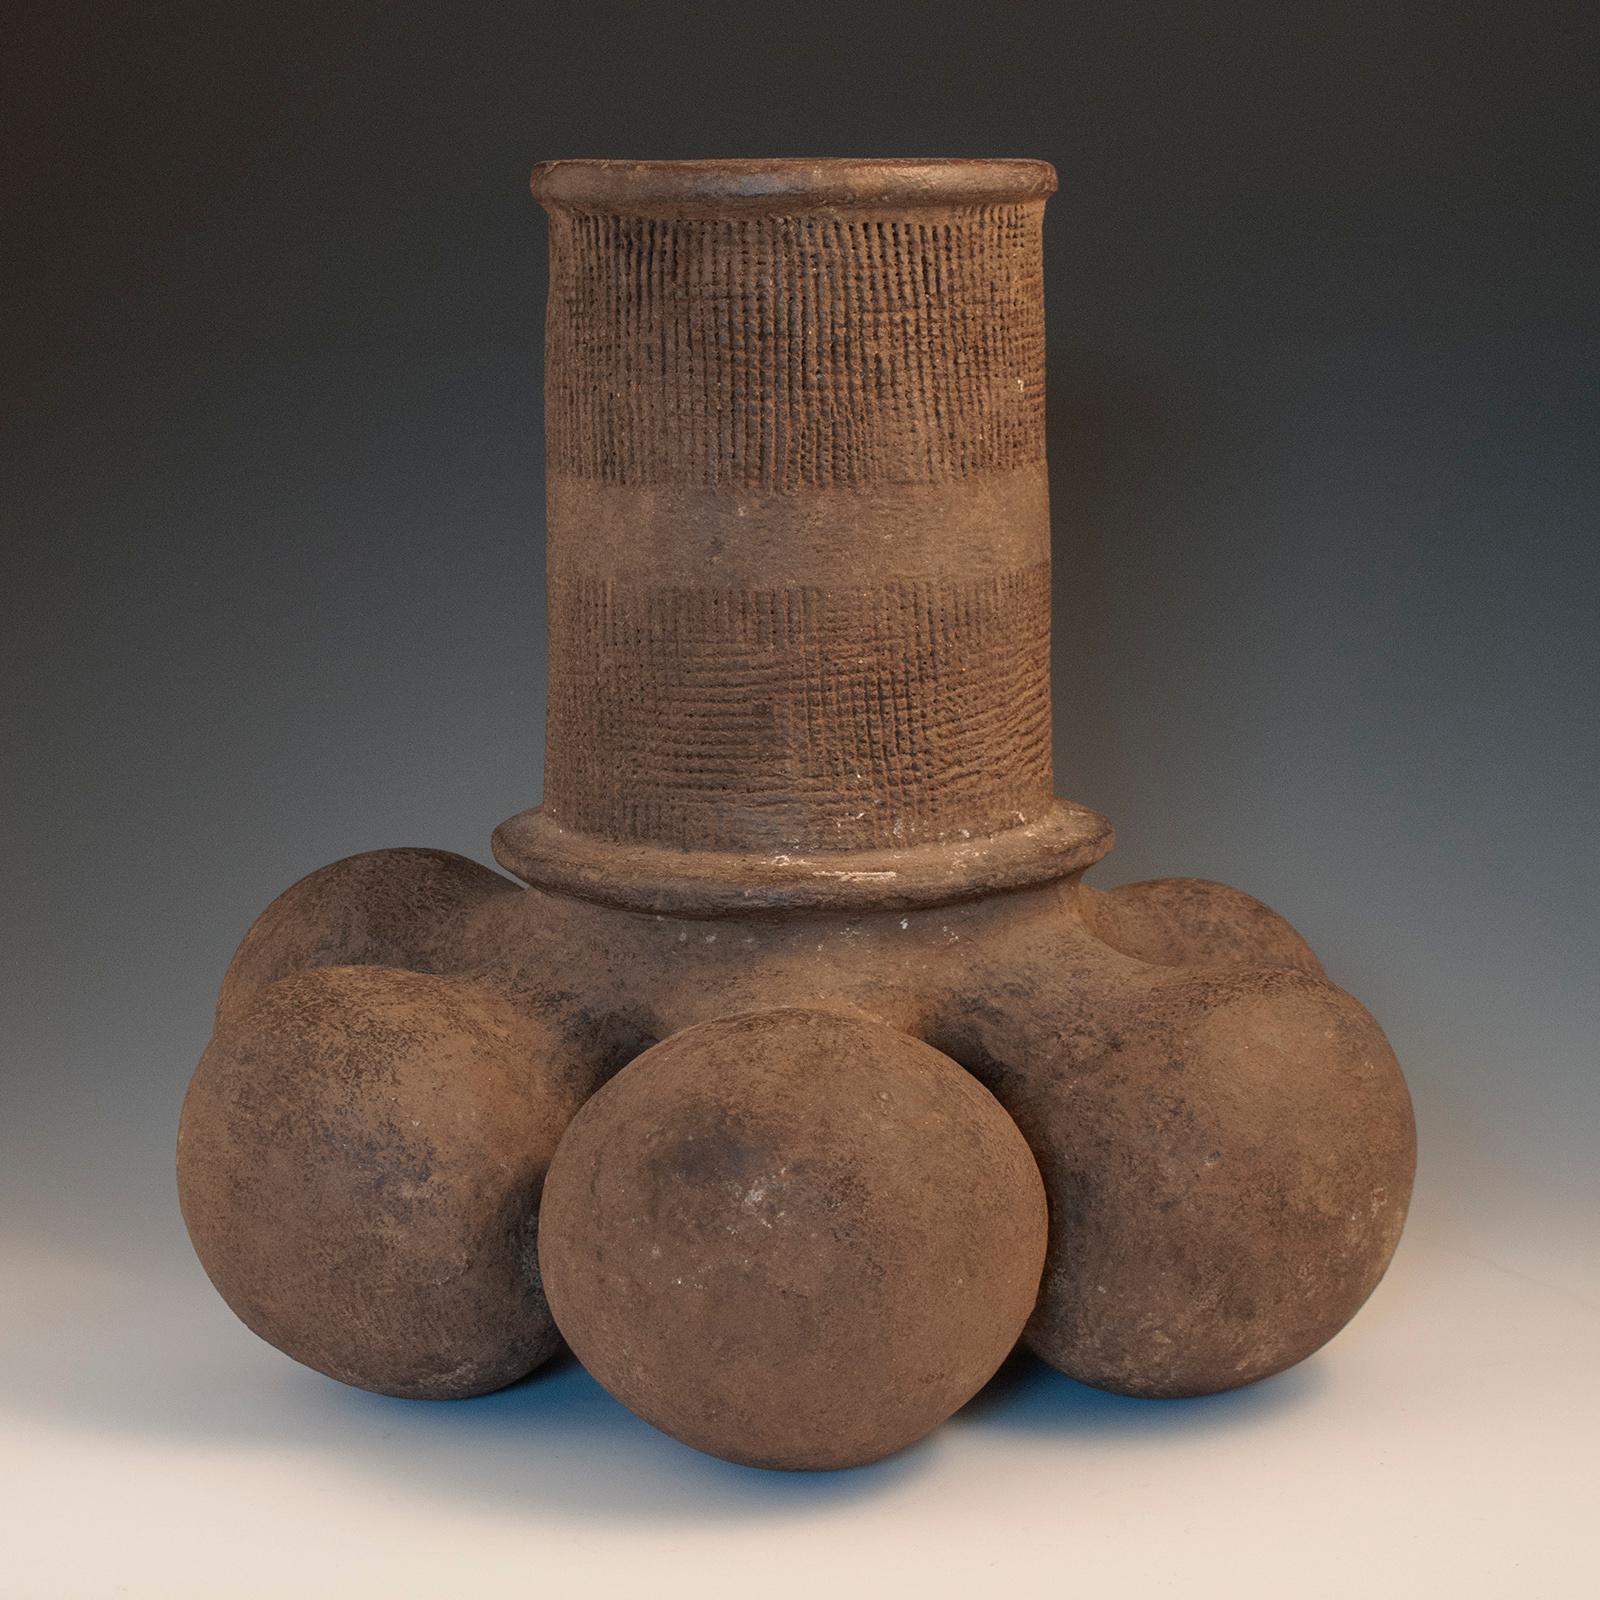 Mid-20th Century Globular Vessel, Mangbetu People, D. R. Congo

An unusually large and striking non-figurative vessel from the Mangbetu people, comprised of six lobes joined to a central vertical cylinder having an impressed crosshatch texture. No